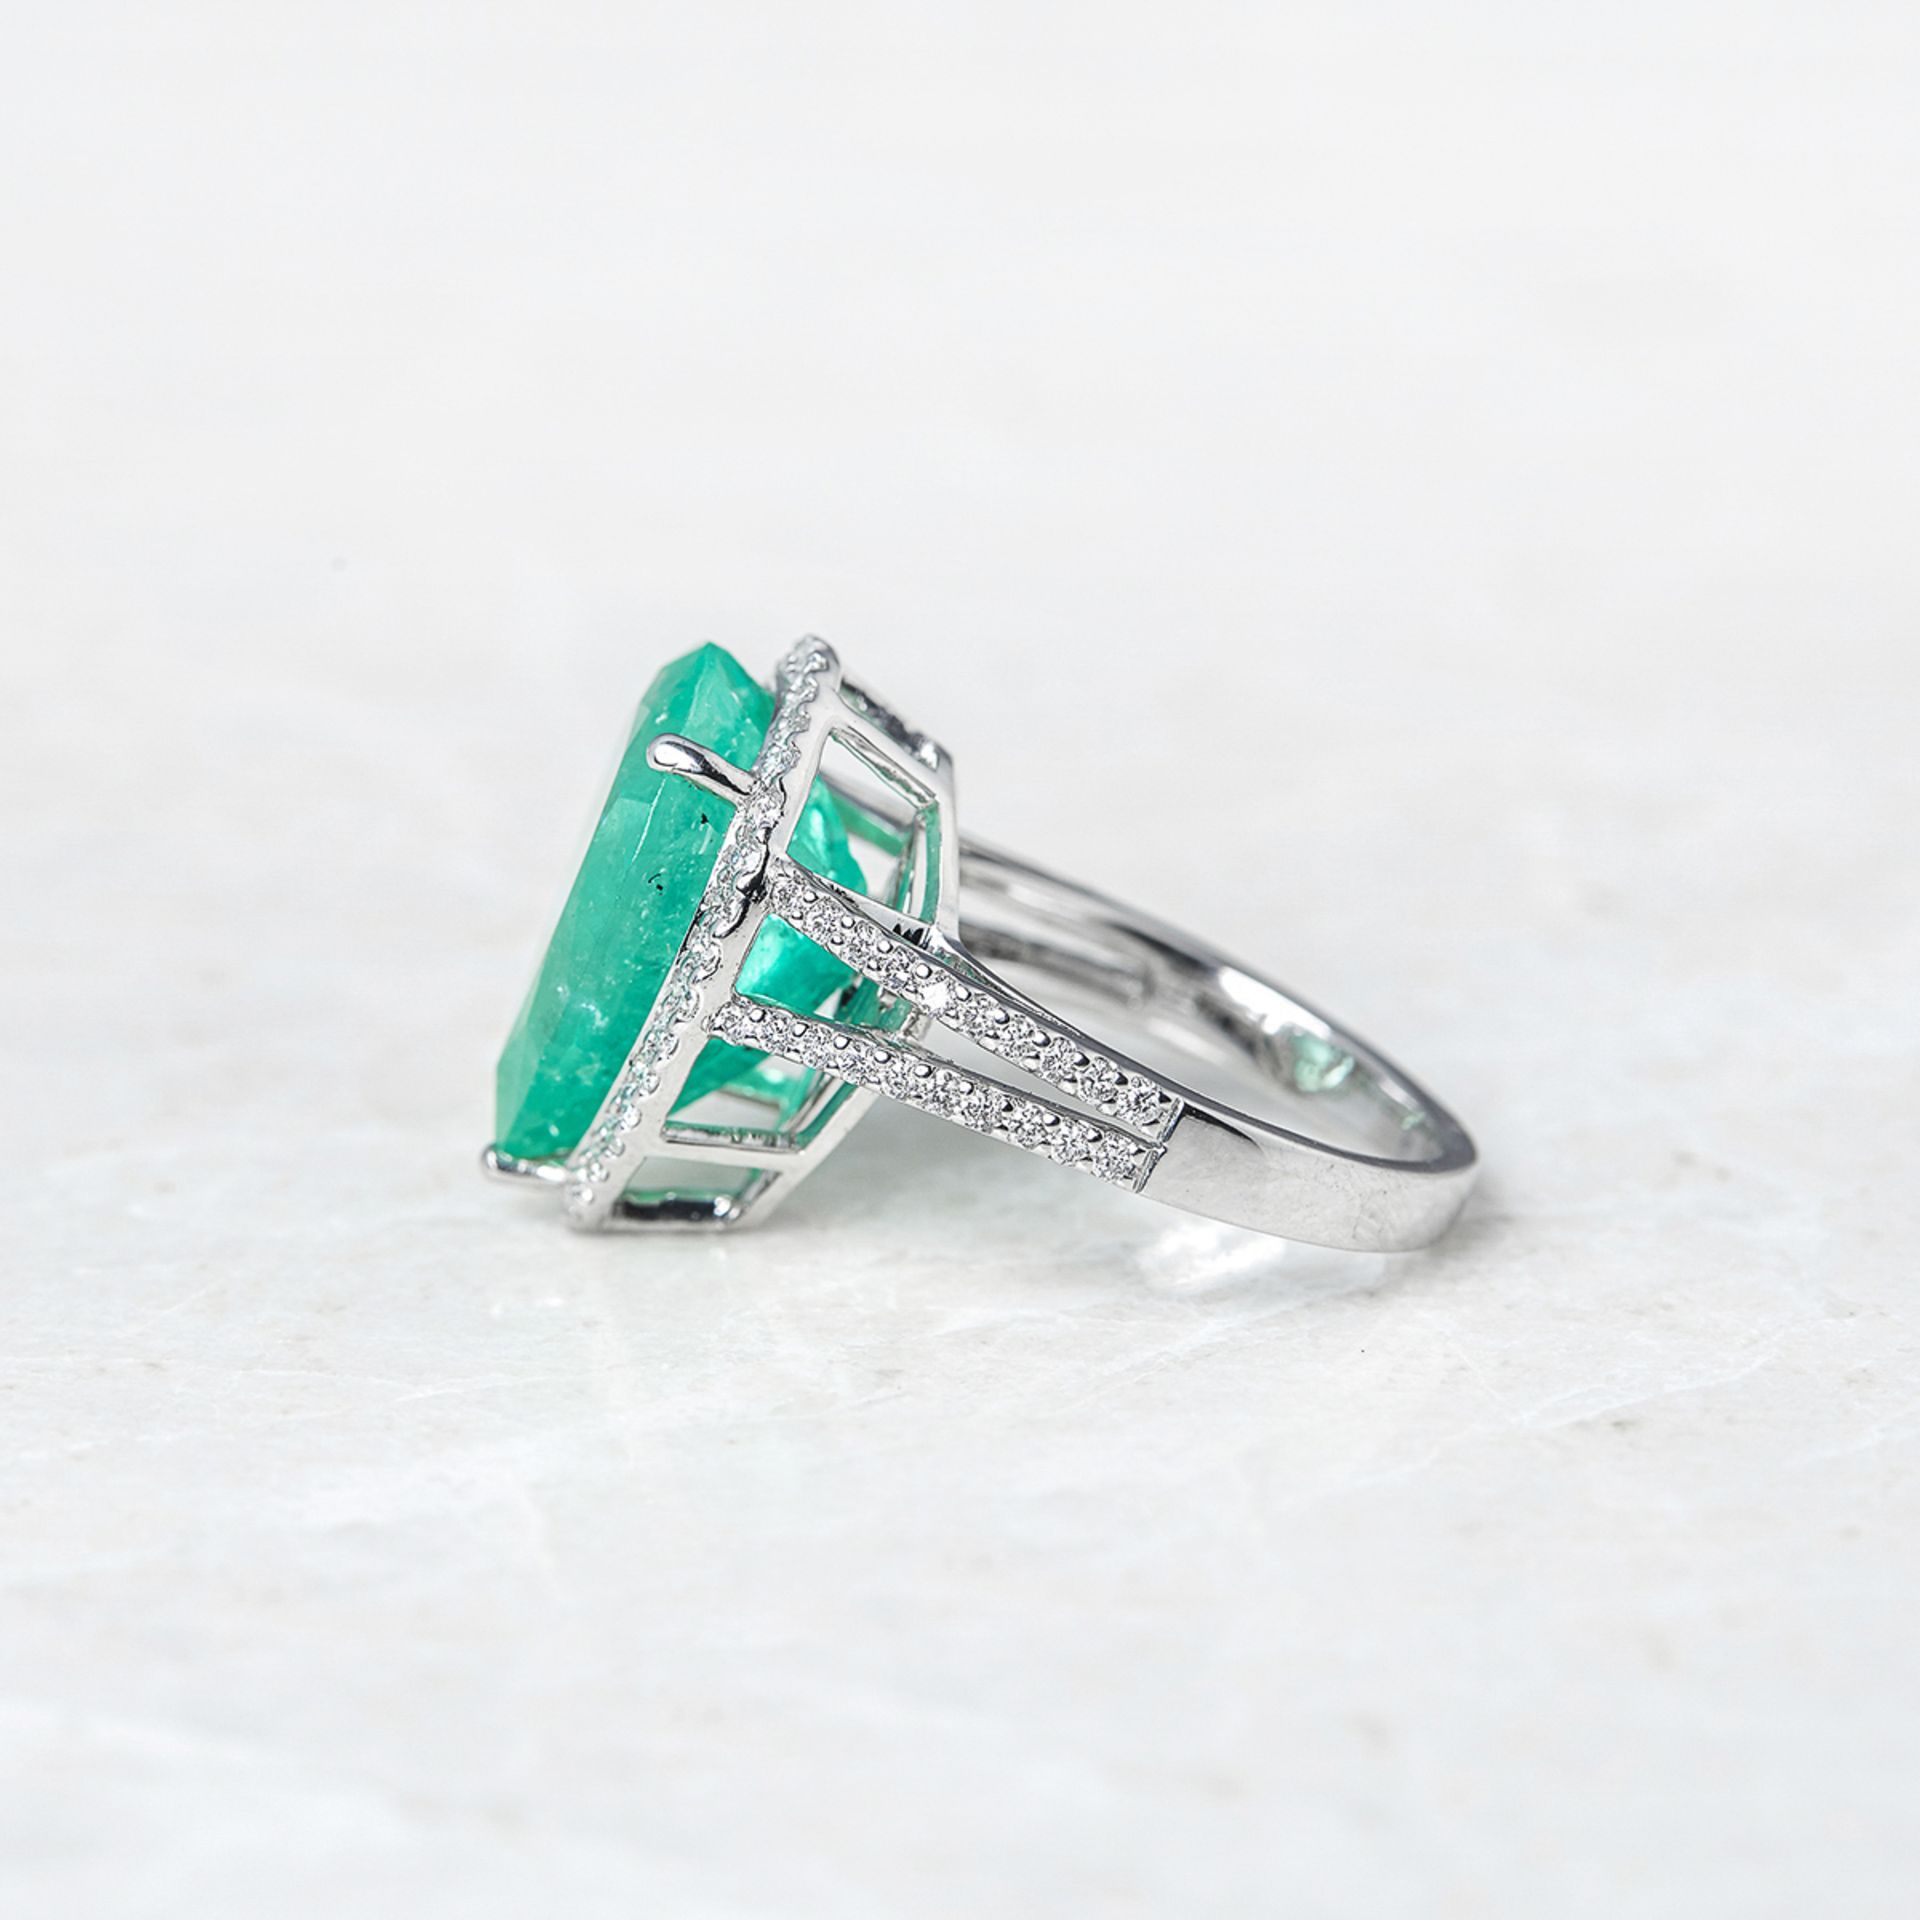 Unbranded, 18k White Gold 8.66ct Colombian Emerald & 0.65ct Diamond Ring - Image 3 of 4